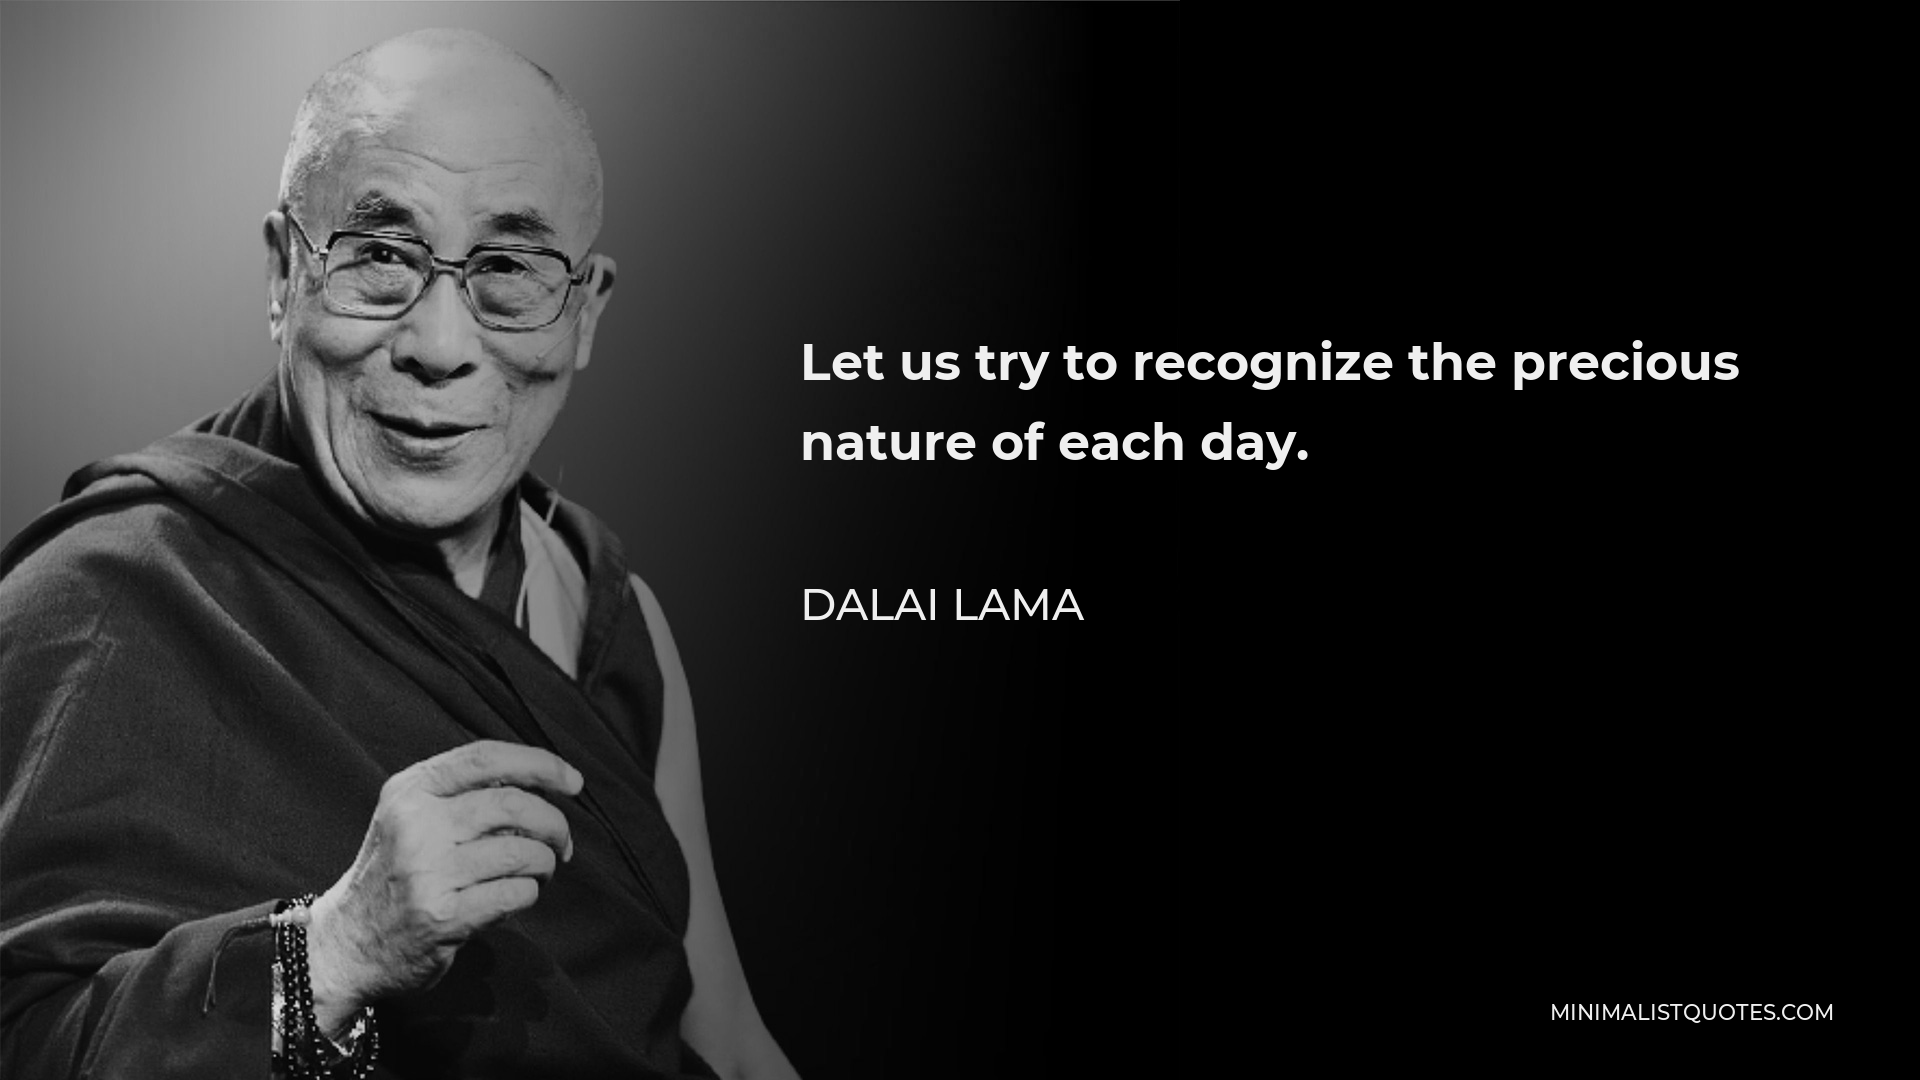 Dalai Lama Quote - Let us try to recognize the precious nature of each day.